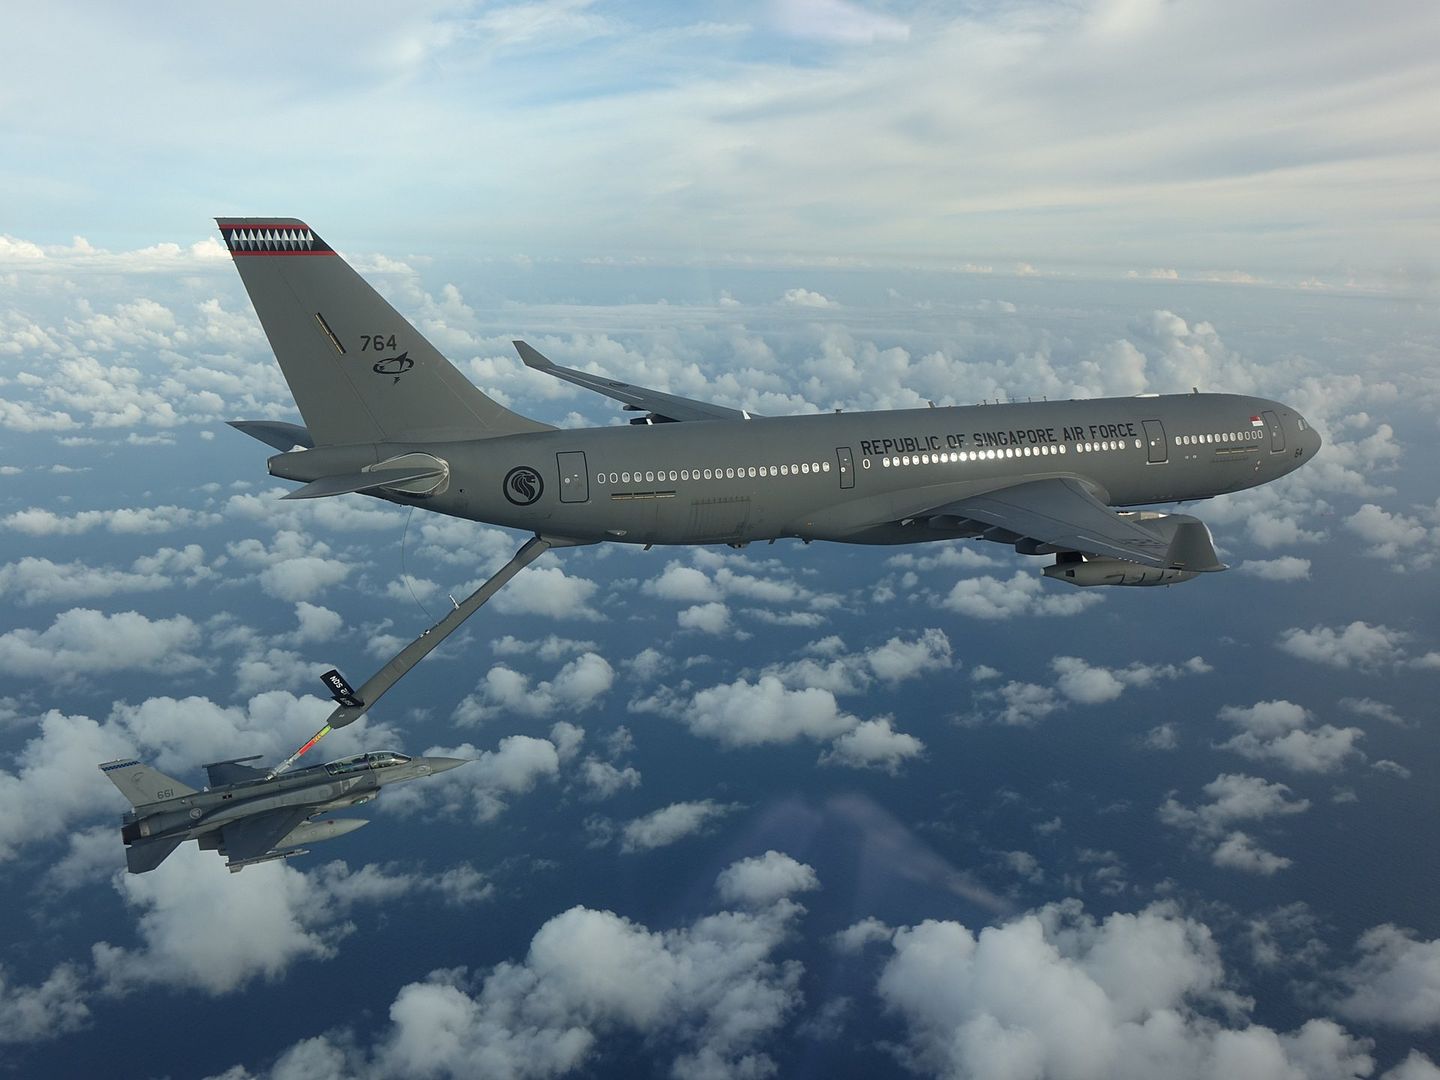 A330 MRTT Auto Refuelling System Completes Development Phase